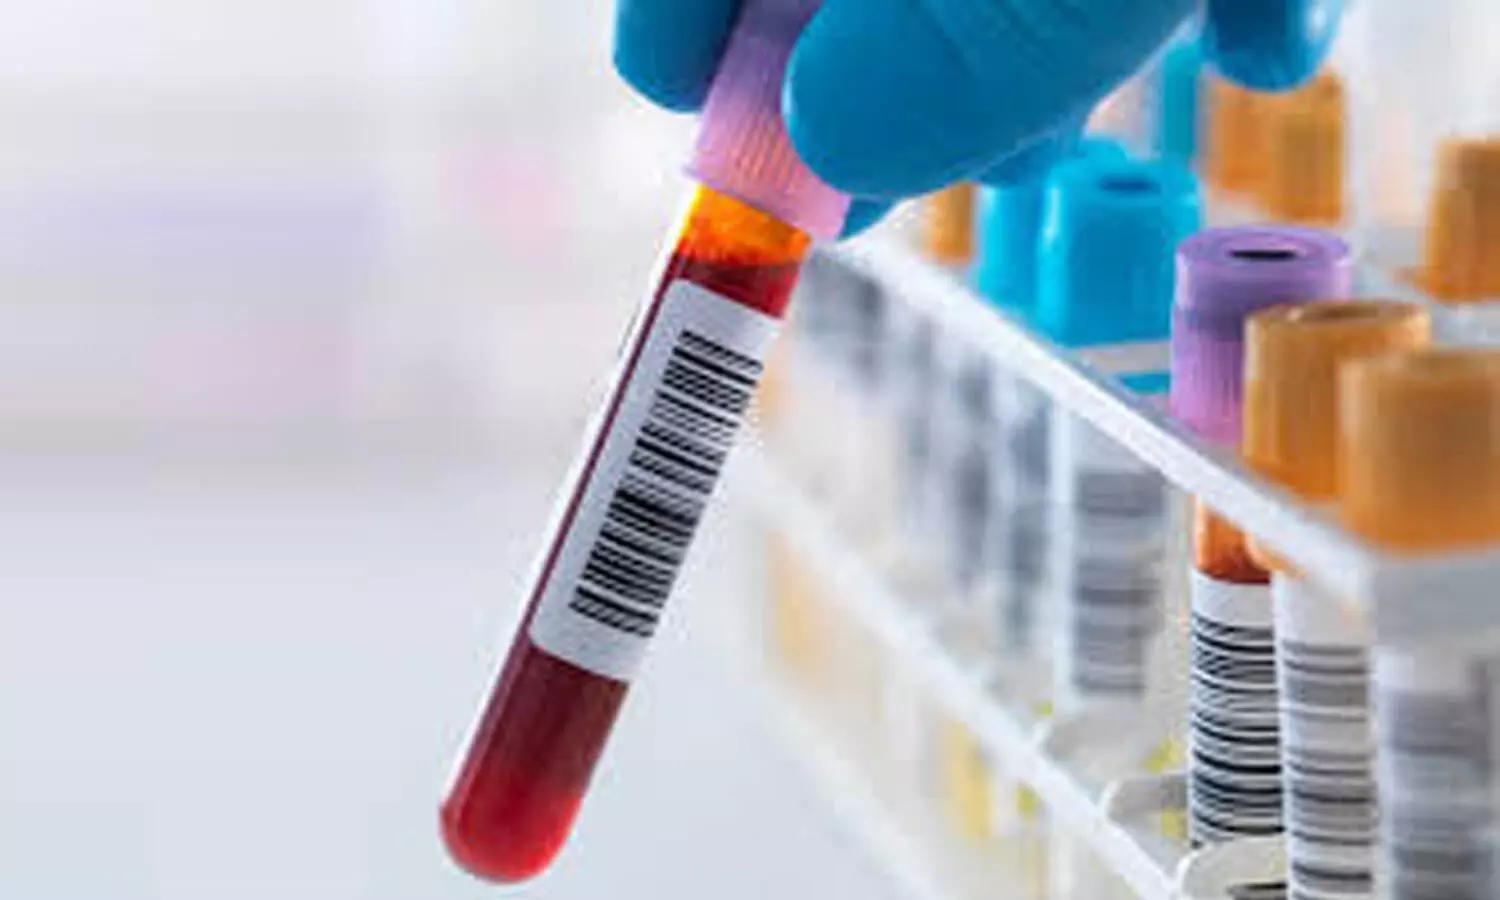 New blood test accurately detects cancer, much before symptoms show